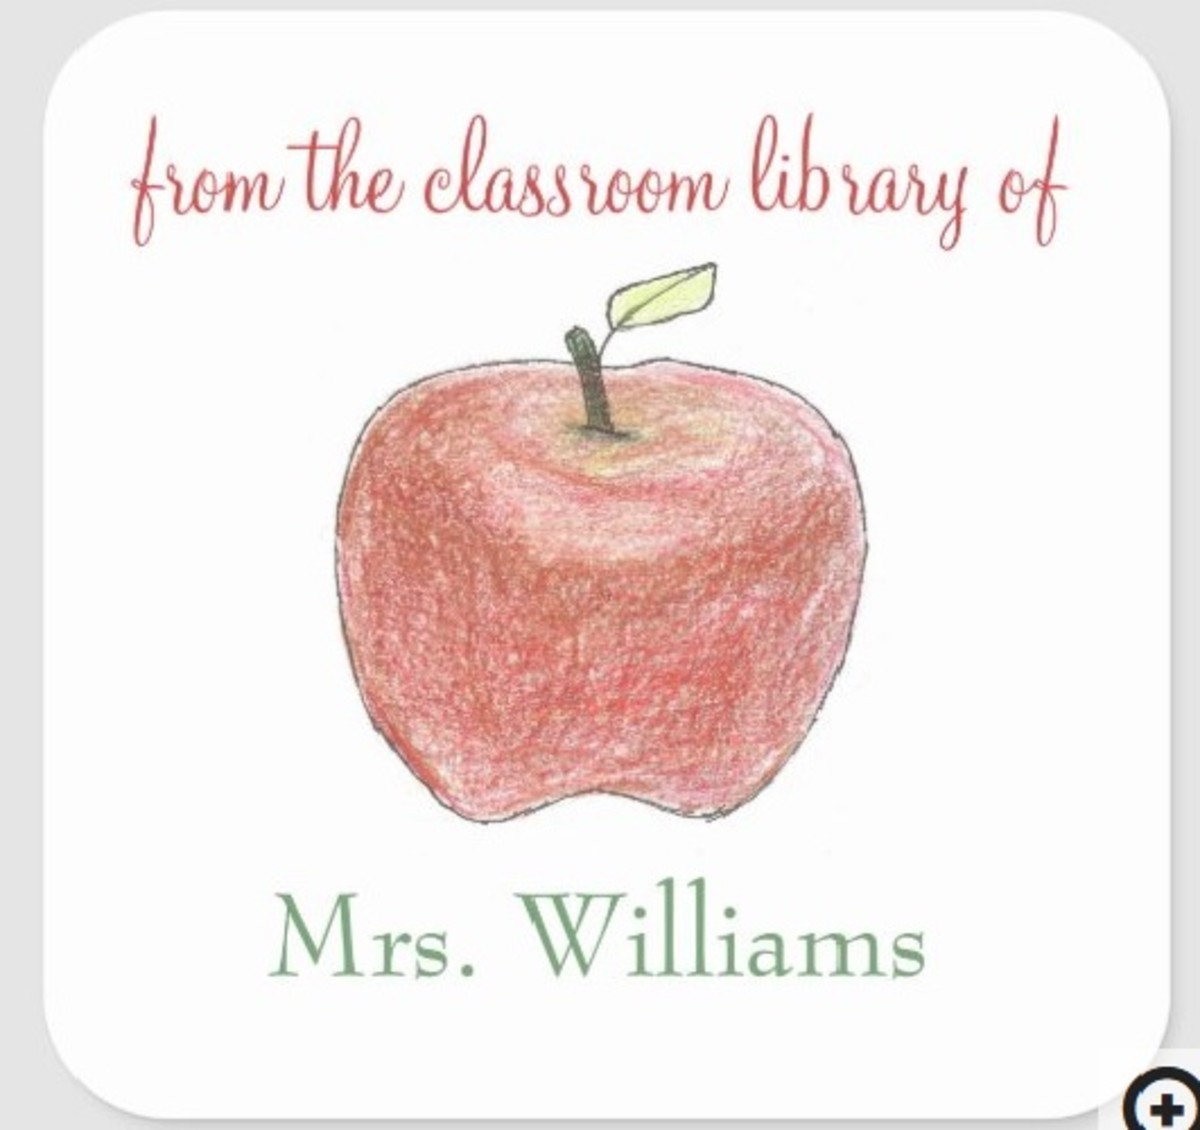 Bookplates make great end of year teacher gifts for your favorite preschool (or other grade level!) educator--as do gently used books your family has outgrown and is ready to donate--or new books, if budget allows.